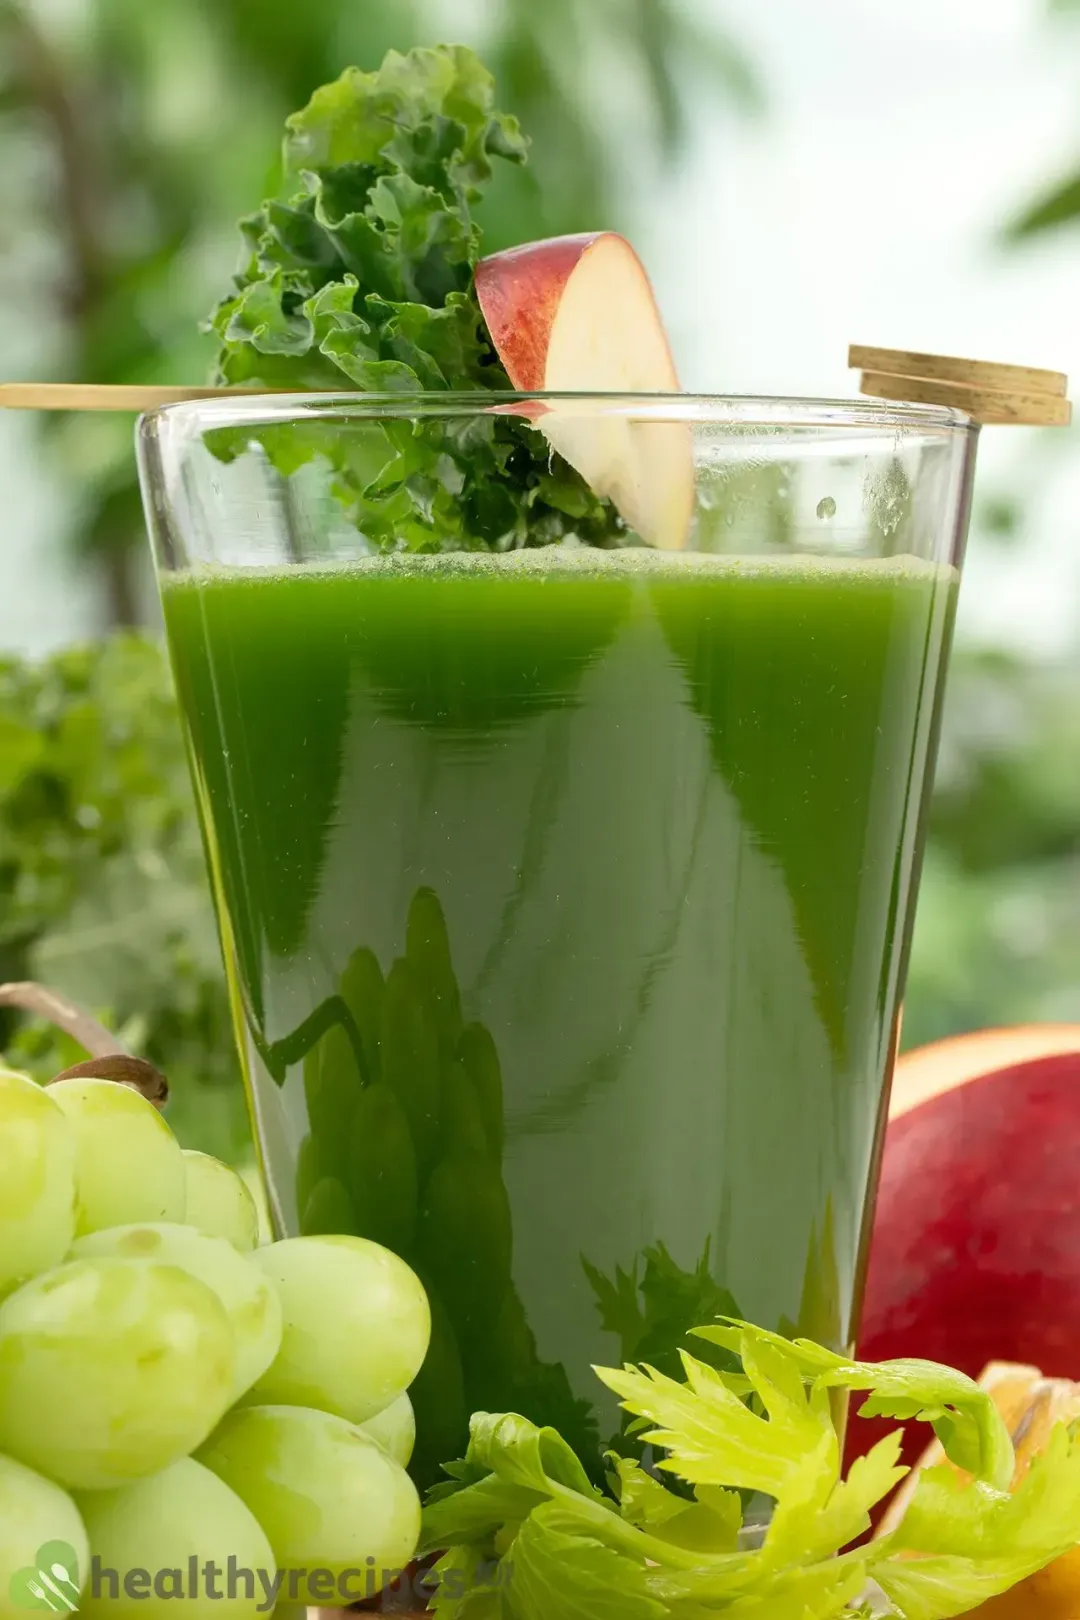  A close-up shot of a glass of green machine juice with some green grapes, kale leaves, celery, and an apple on the side for decorations